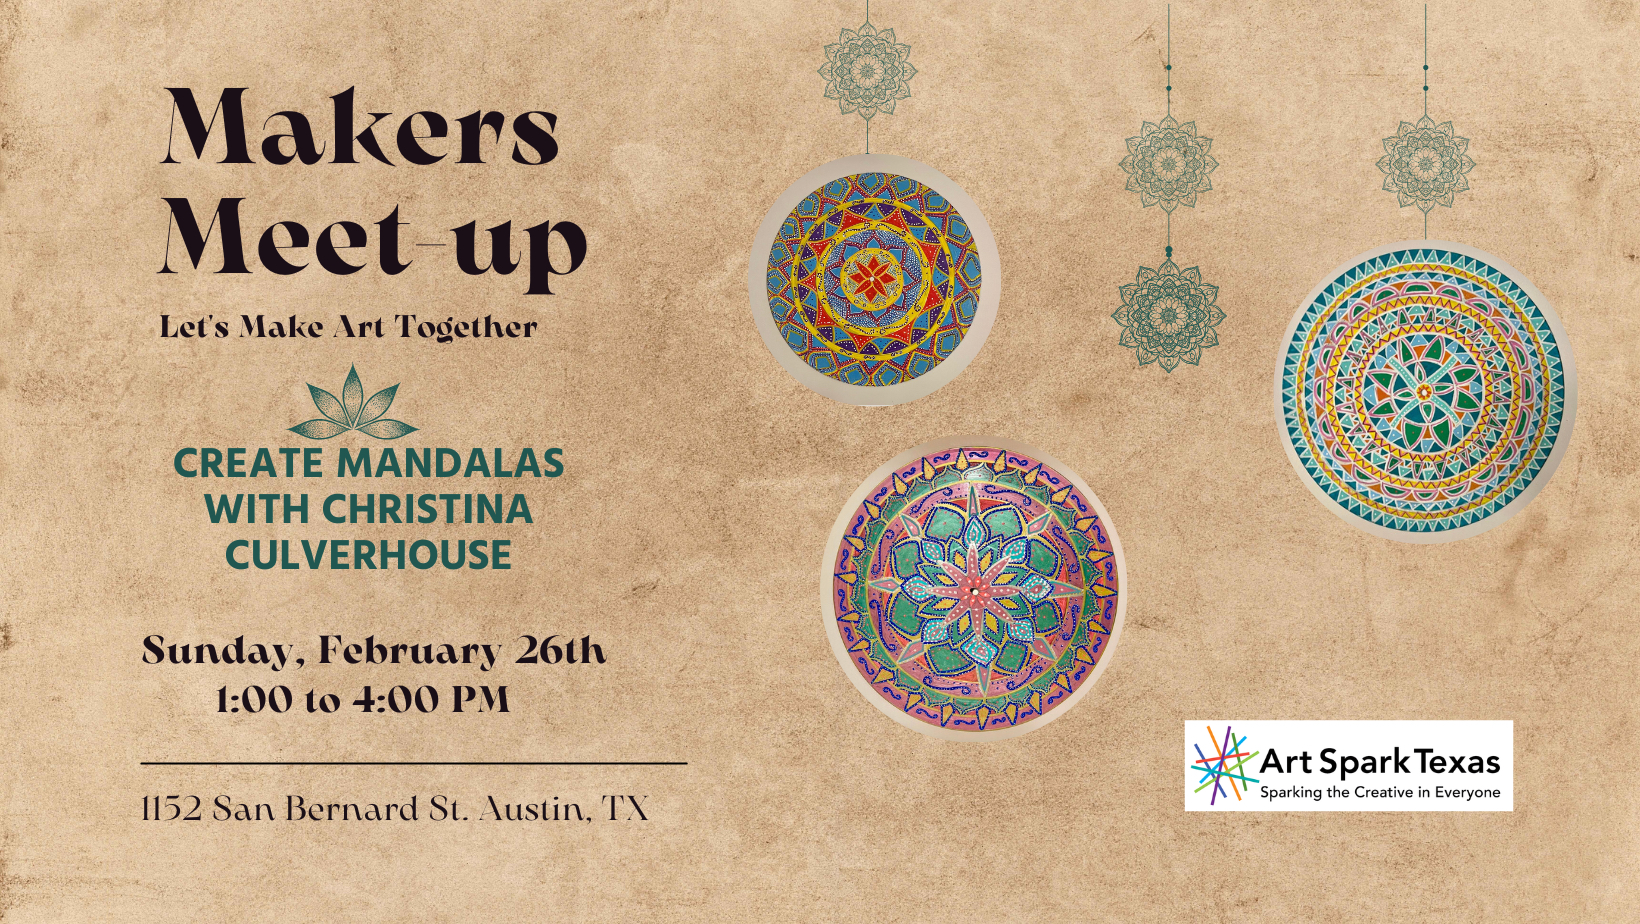 3 mandalas with different patterns and colors. Text reads, "Maker's Meet Up. Create Mandalas with Christina Culverhouse."